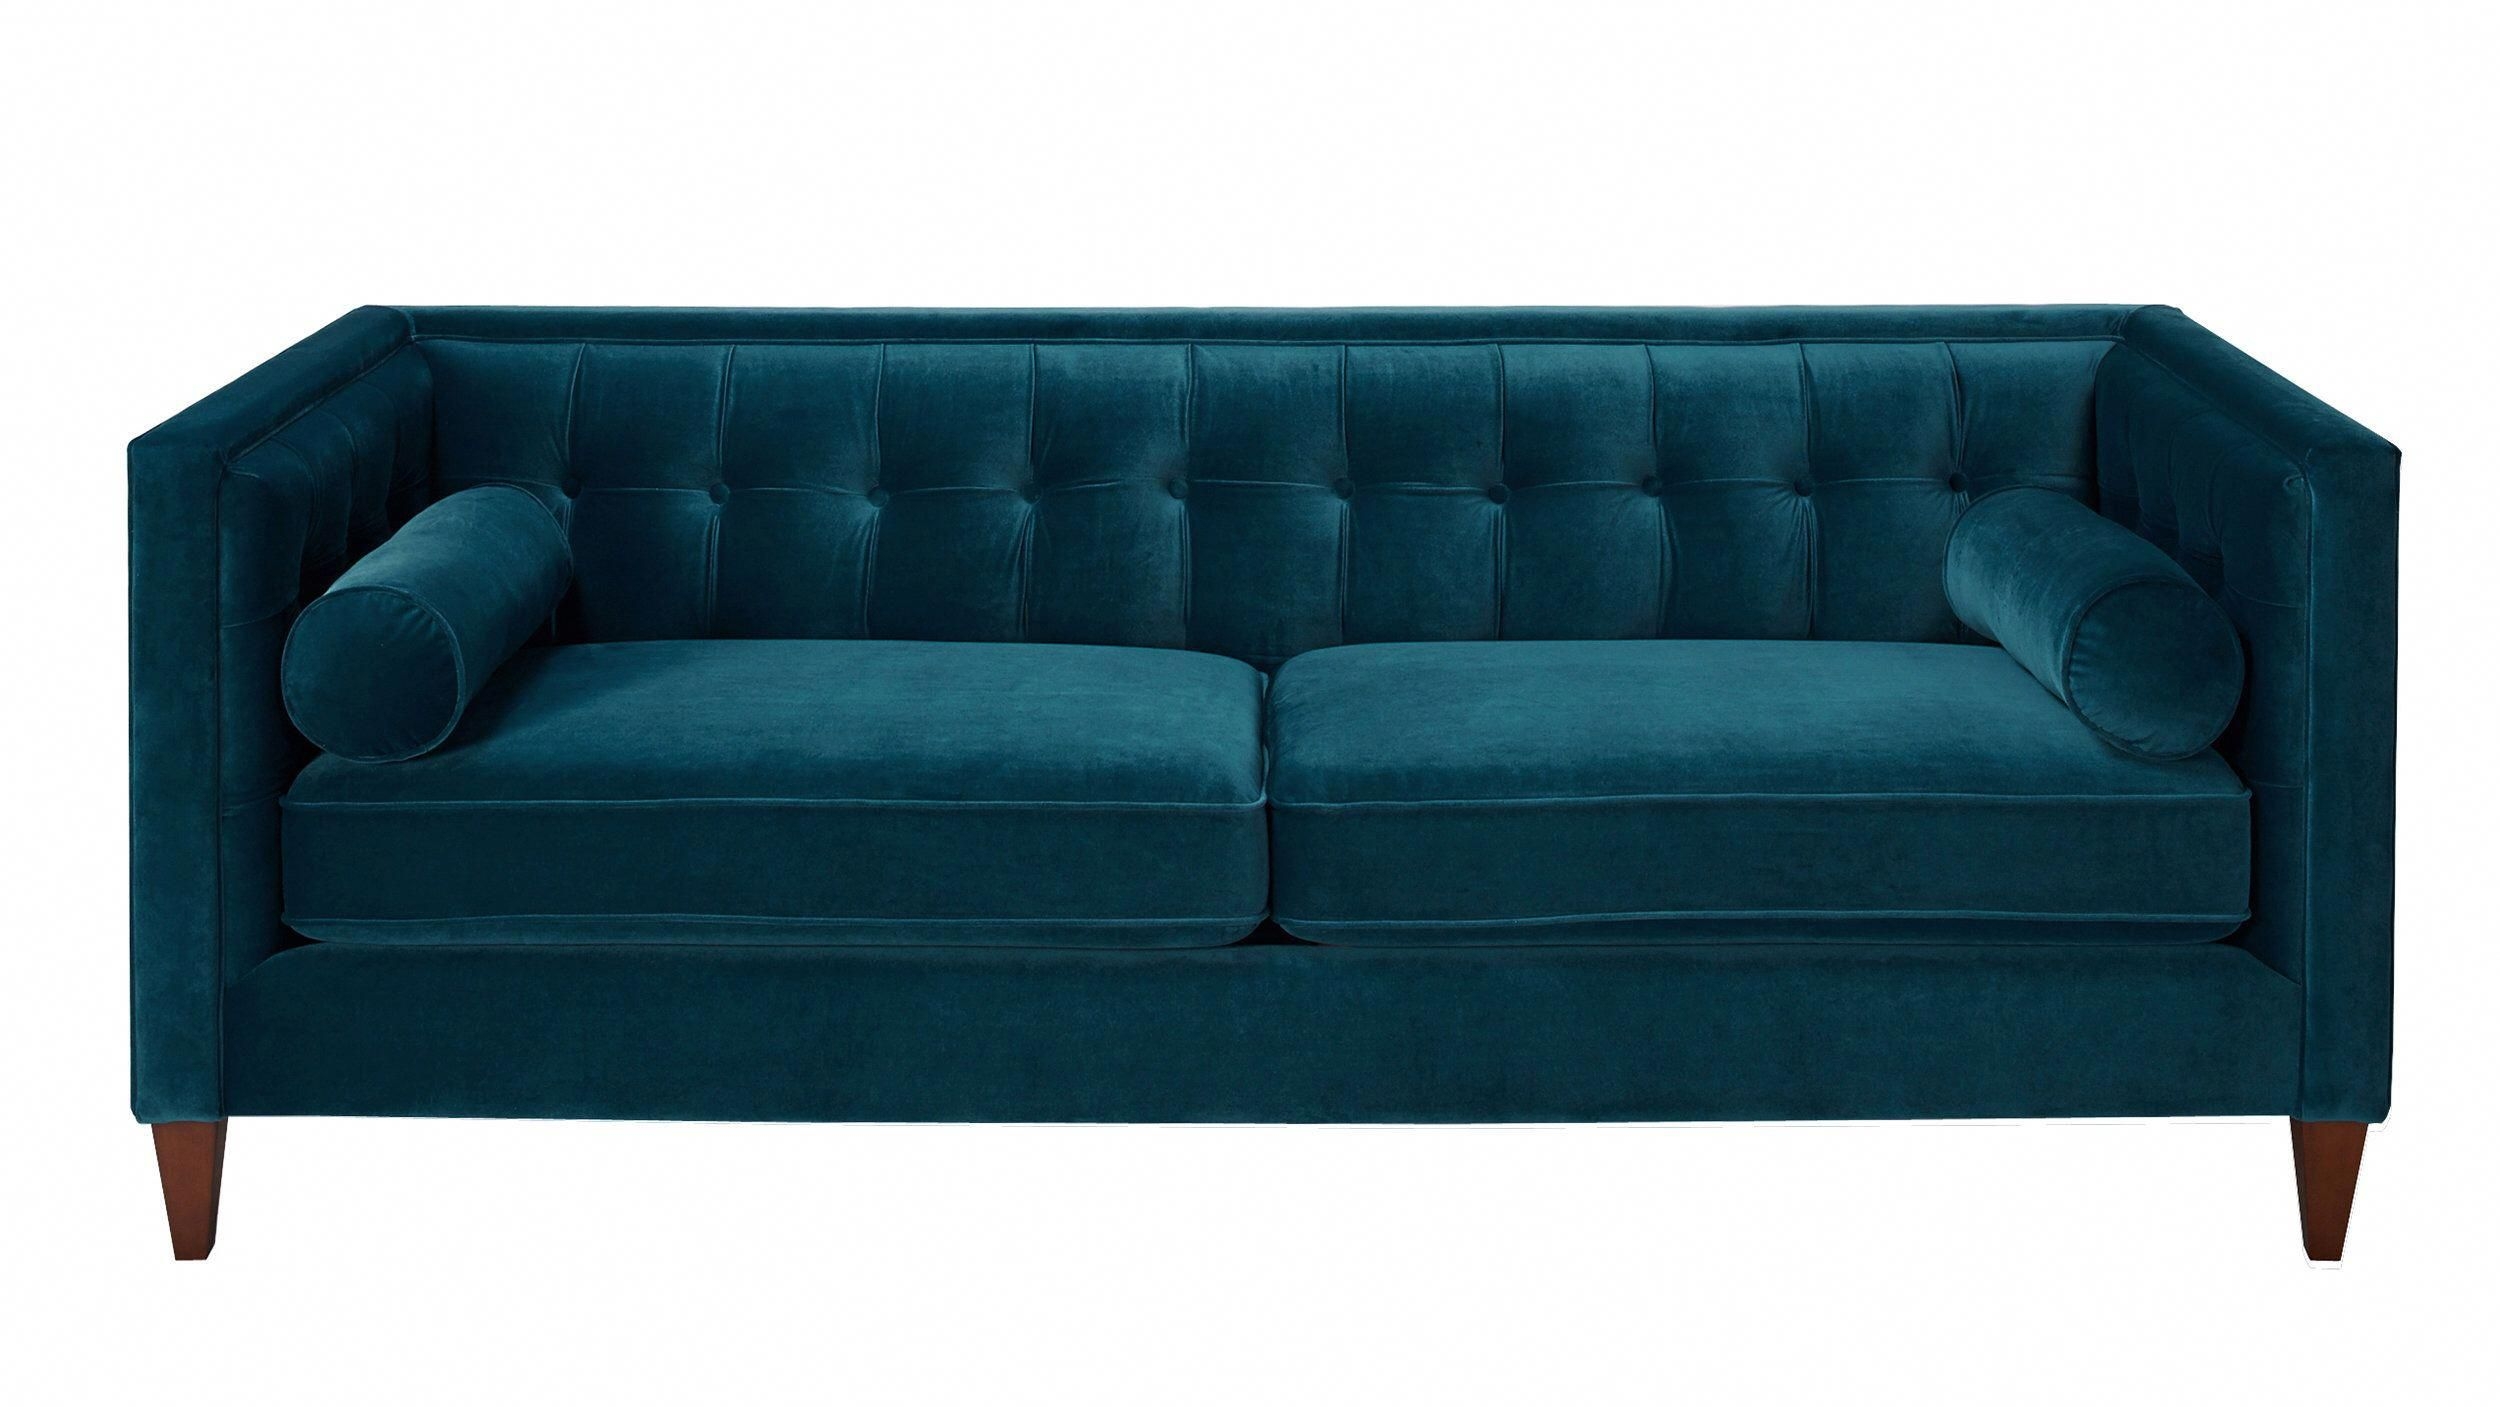 Milano Tufted Sofa in Teal